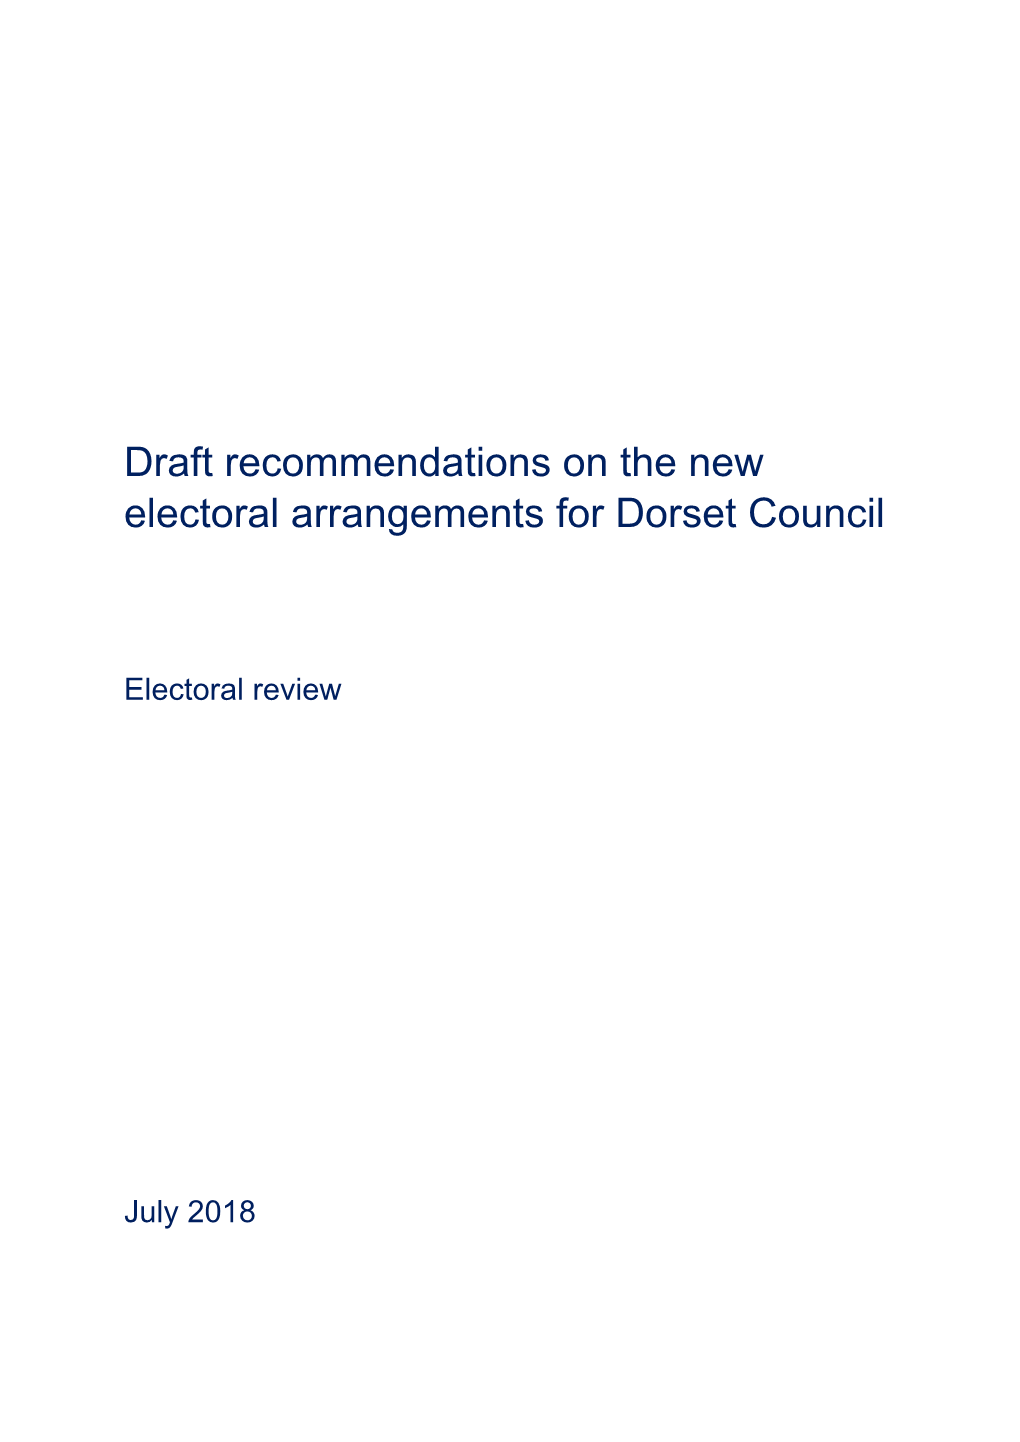 Draft Recommendations on the New Electoral Arrangements for Dorset Council